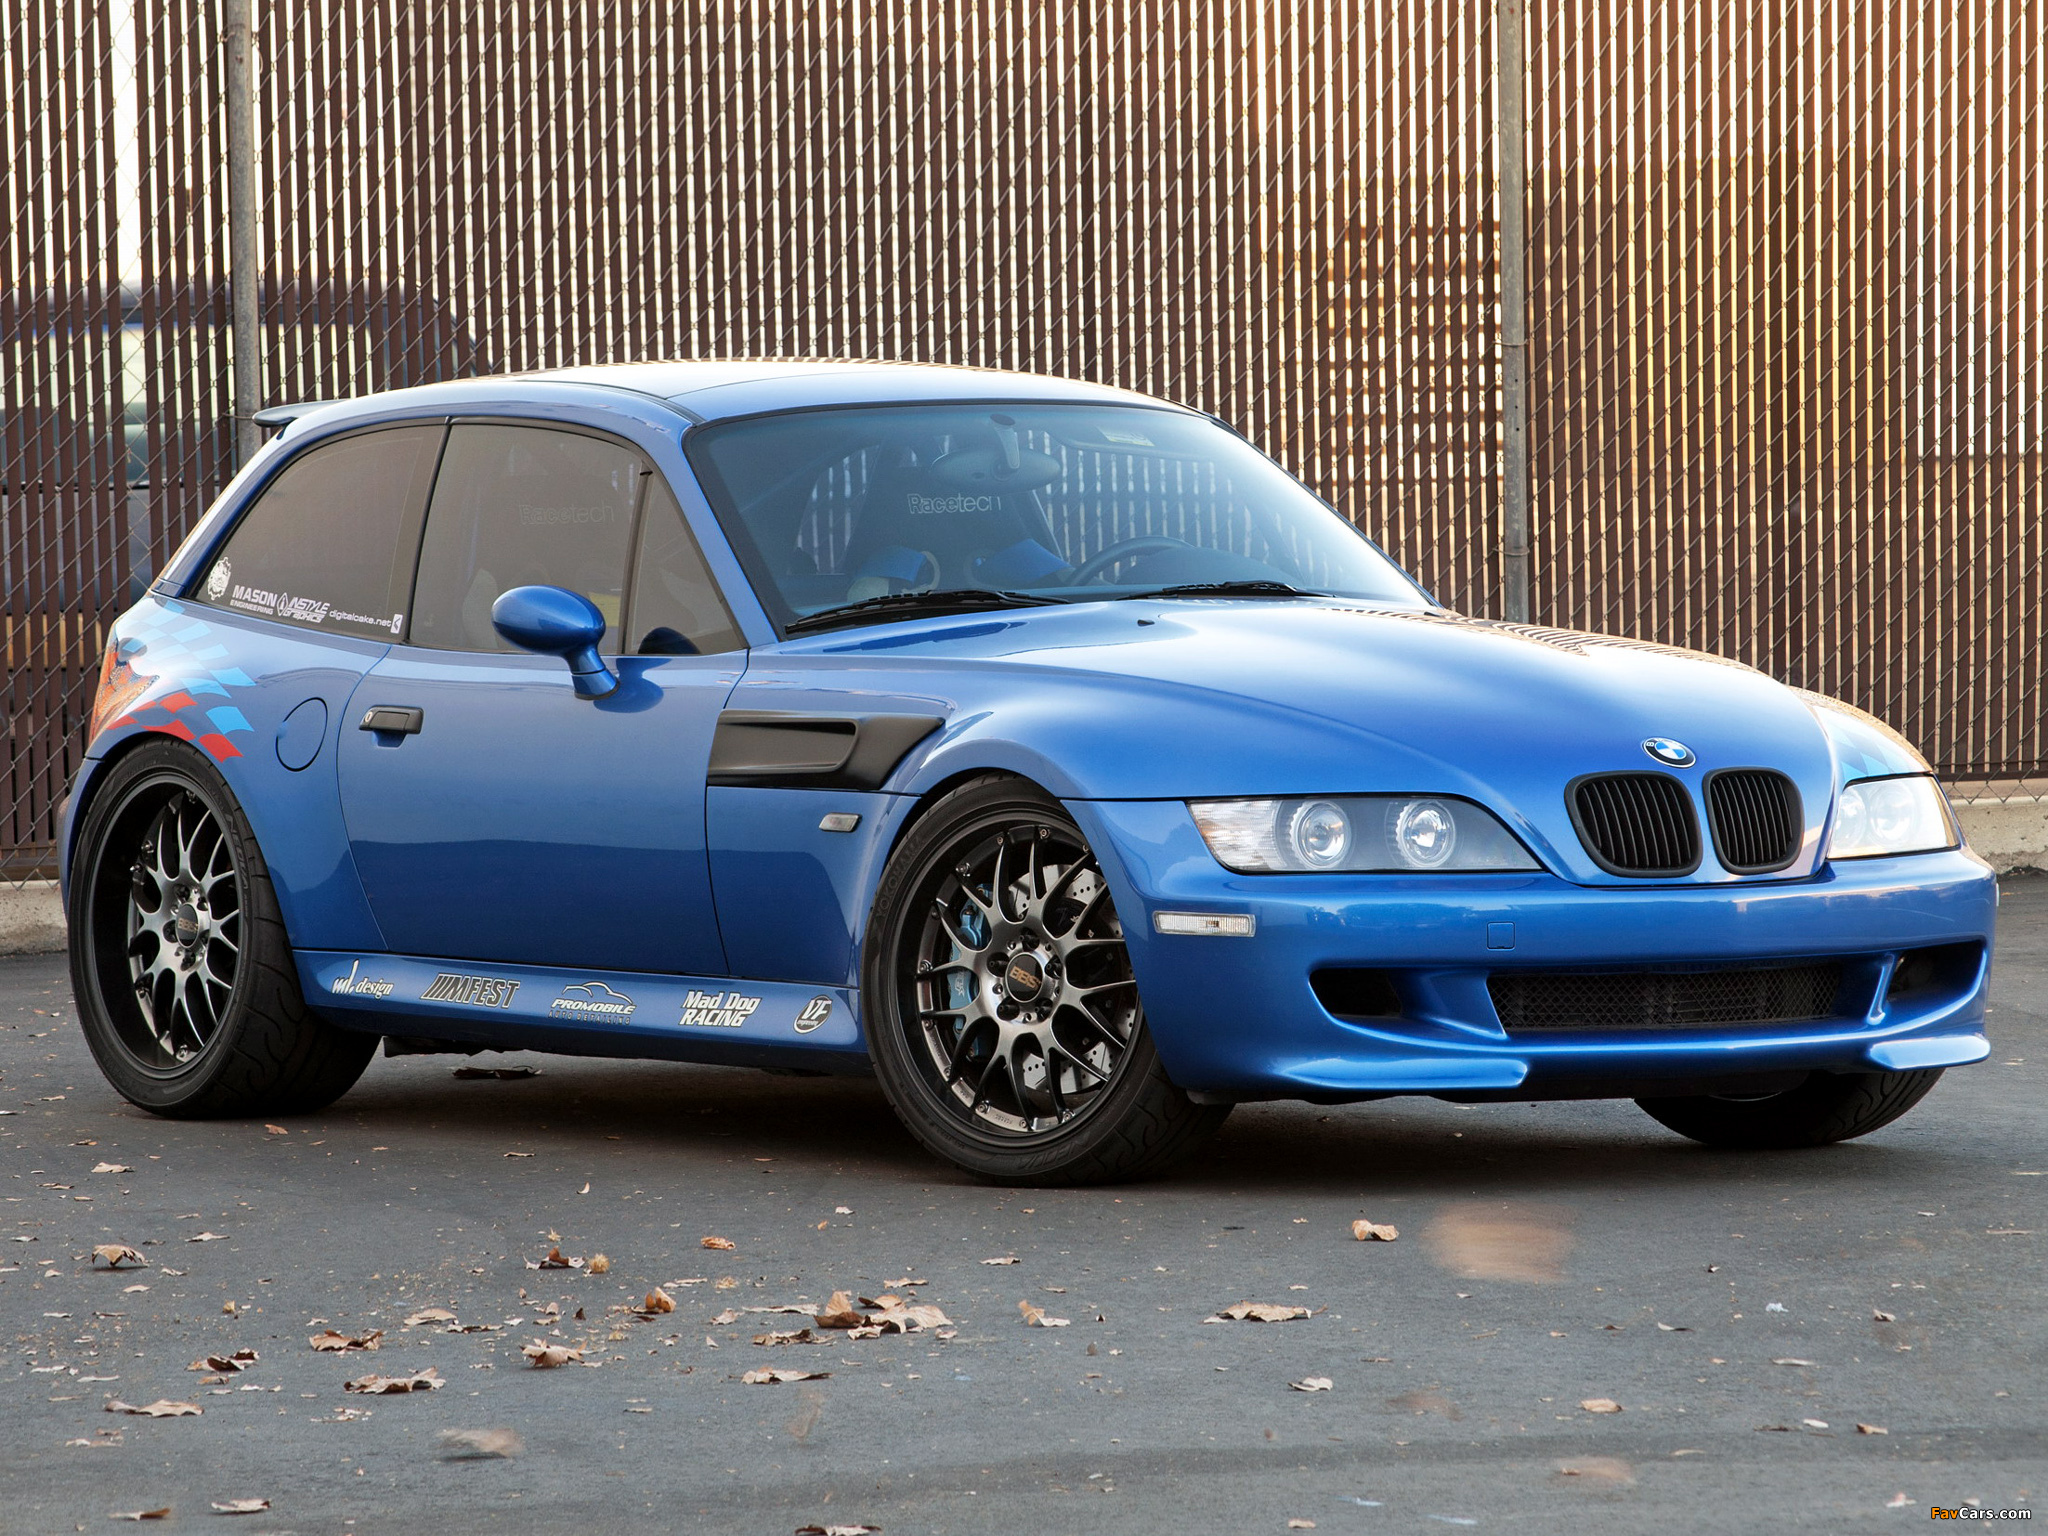 Z3 m. BMW z3 Coupe. BMW z3 m Coupe. BMW z3 m Coupe 2001. BMW z3 m Coupe Tuning.